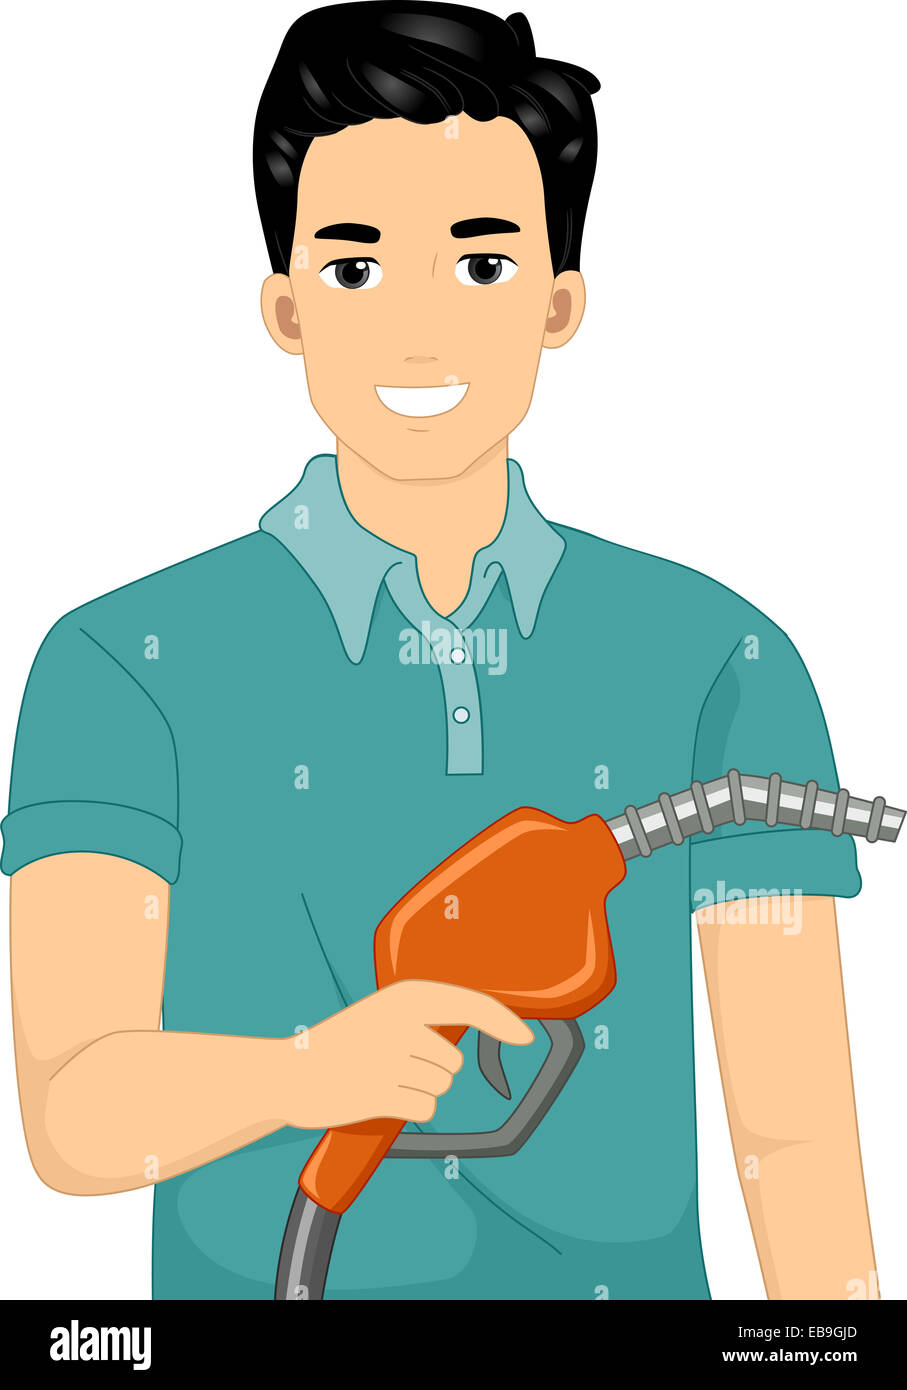 Illustration of a Man Holding a Gasoline Pump Handle Stock Photo